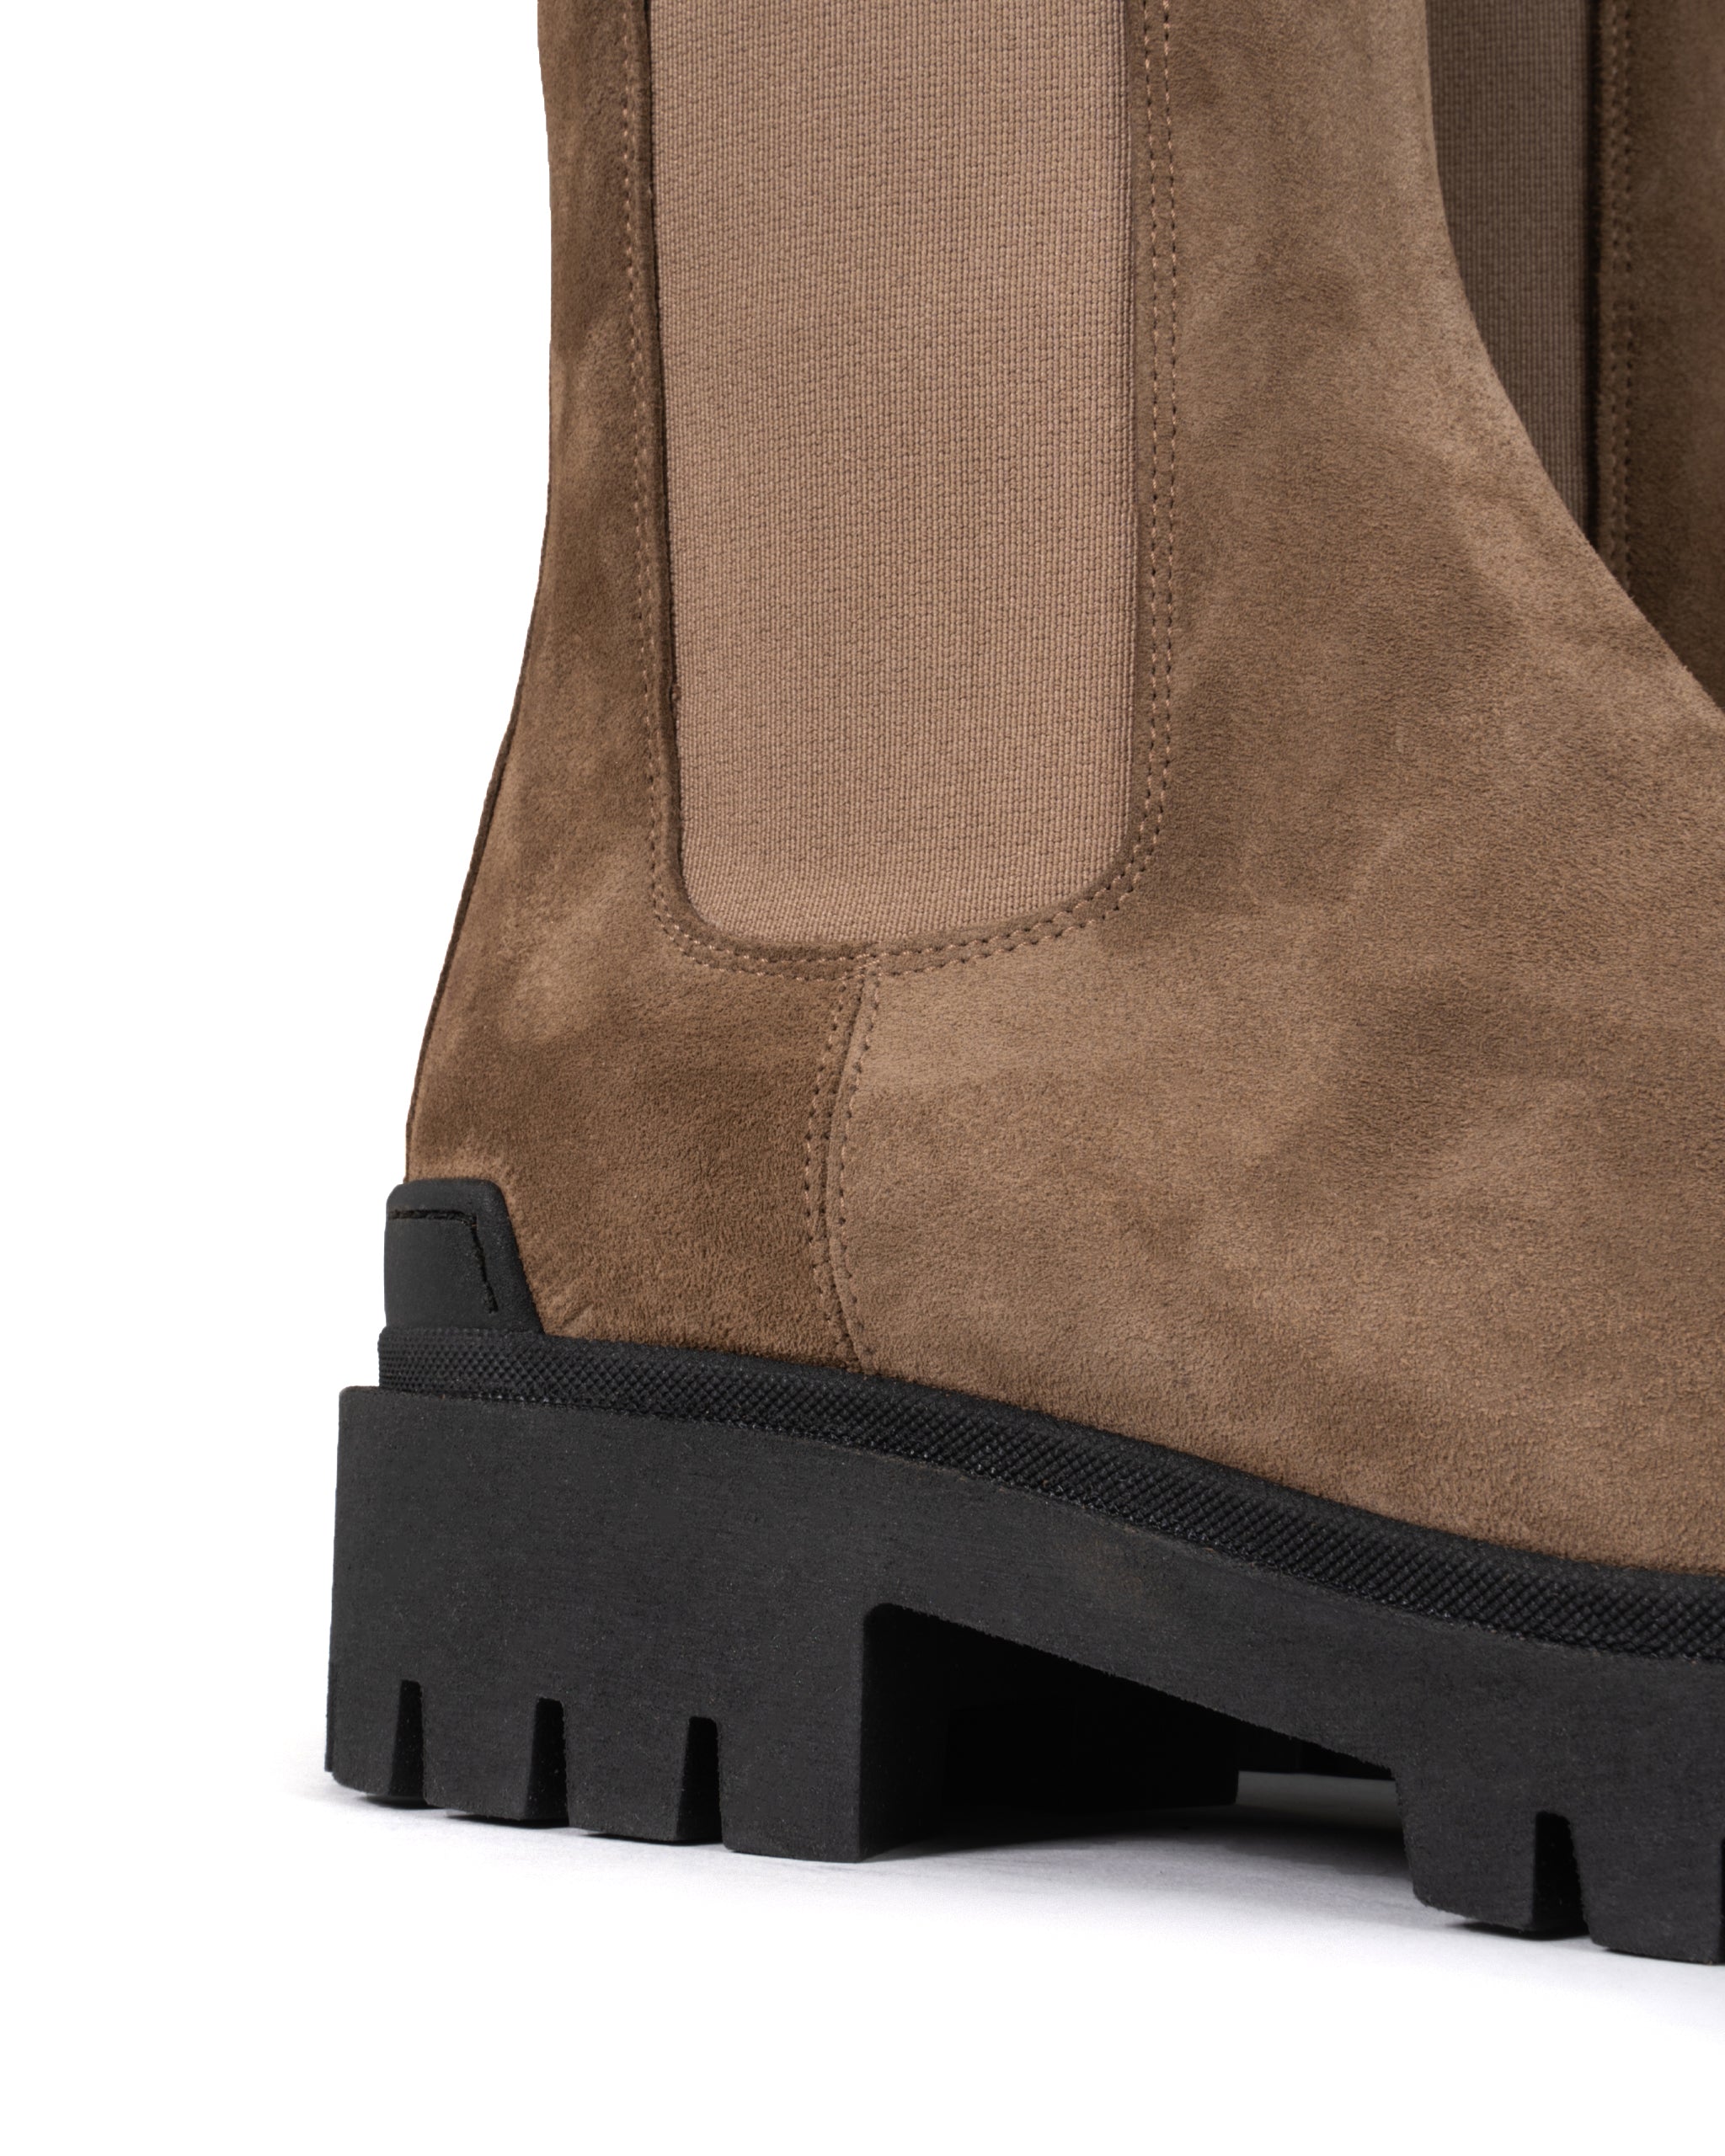 HIGH SUEDE CHELSEA BOOT